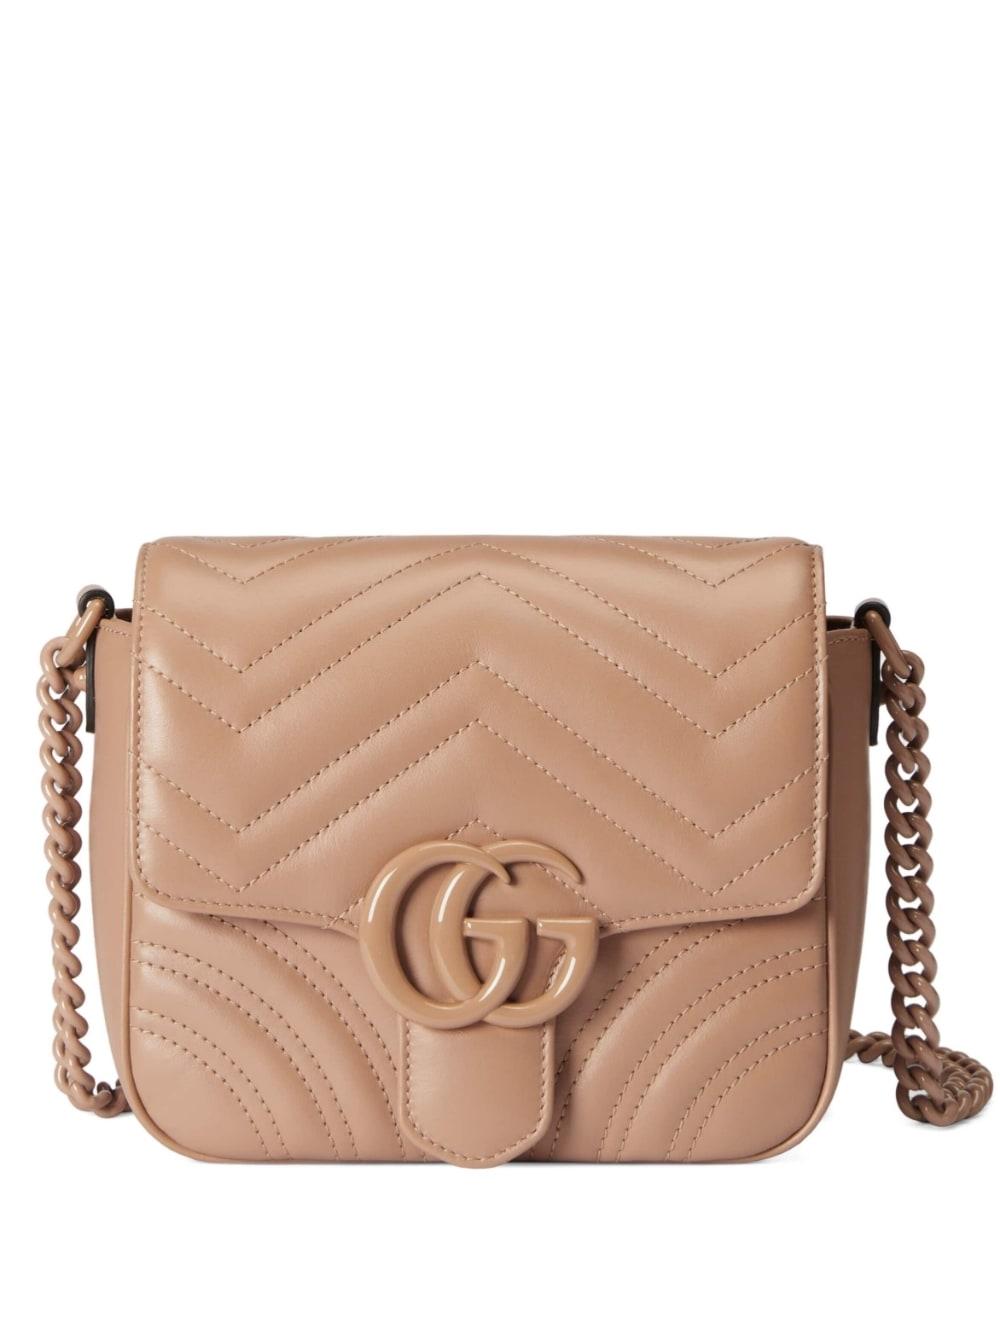 Gucci GG Marmont Mini Shoulder Bag in Brown | Lyst